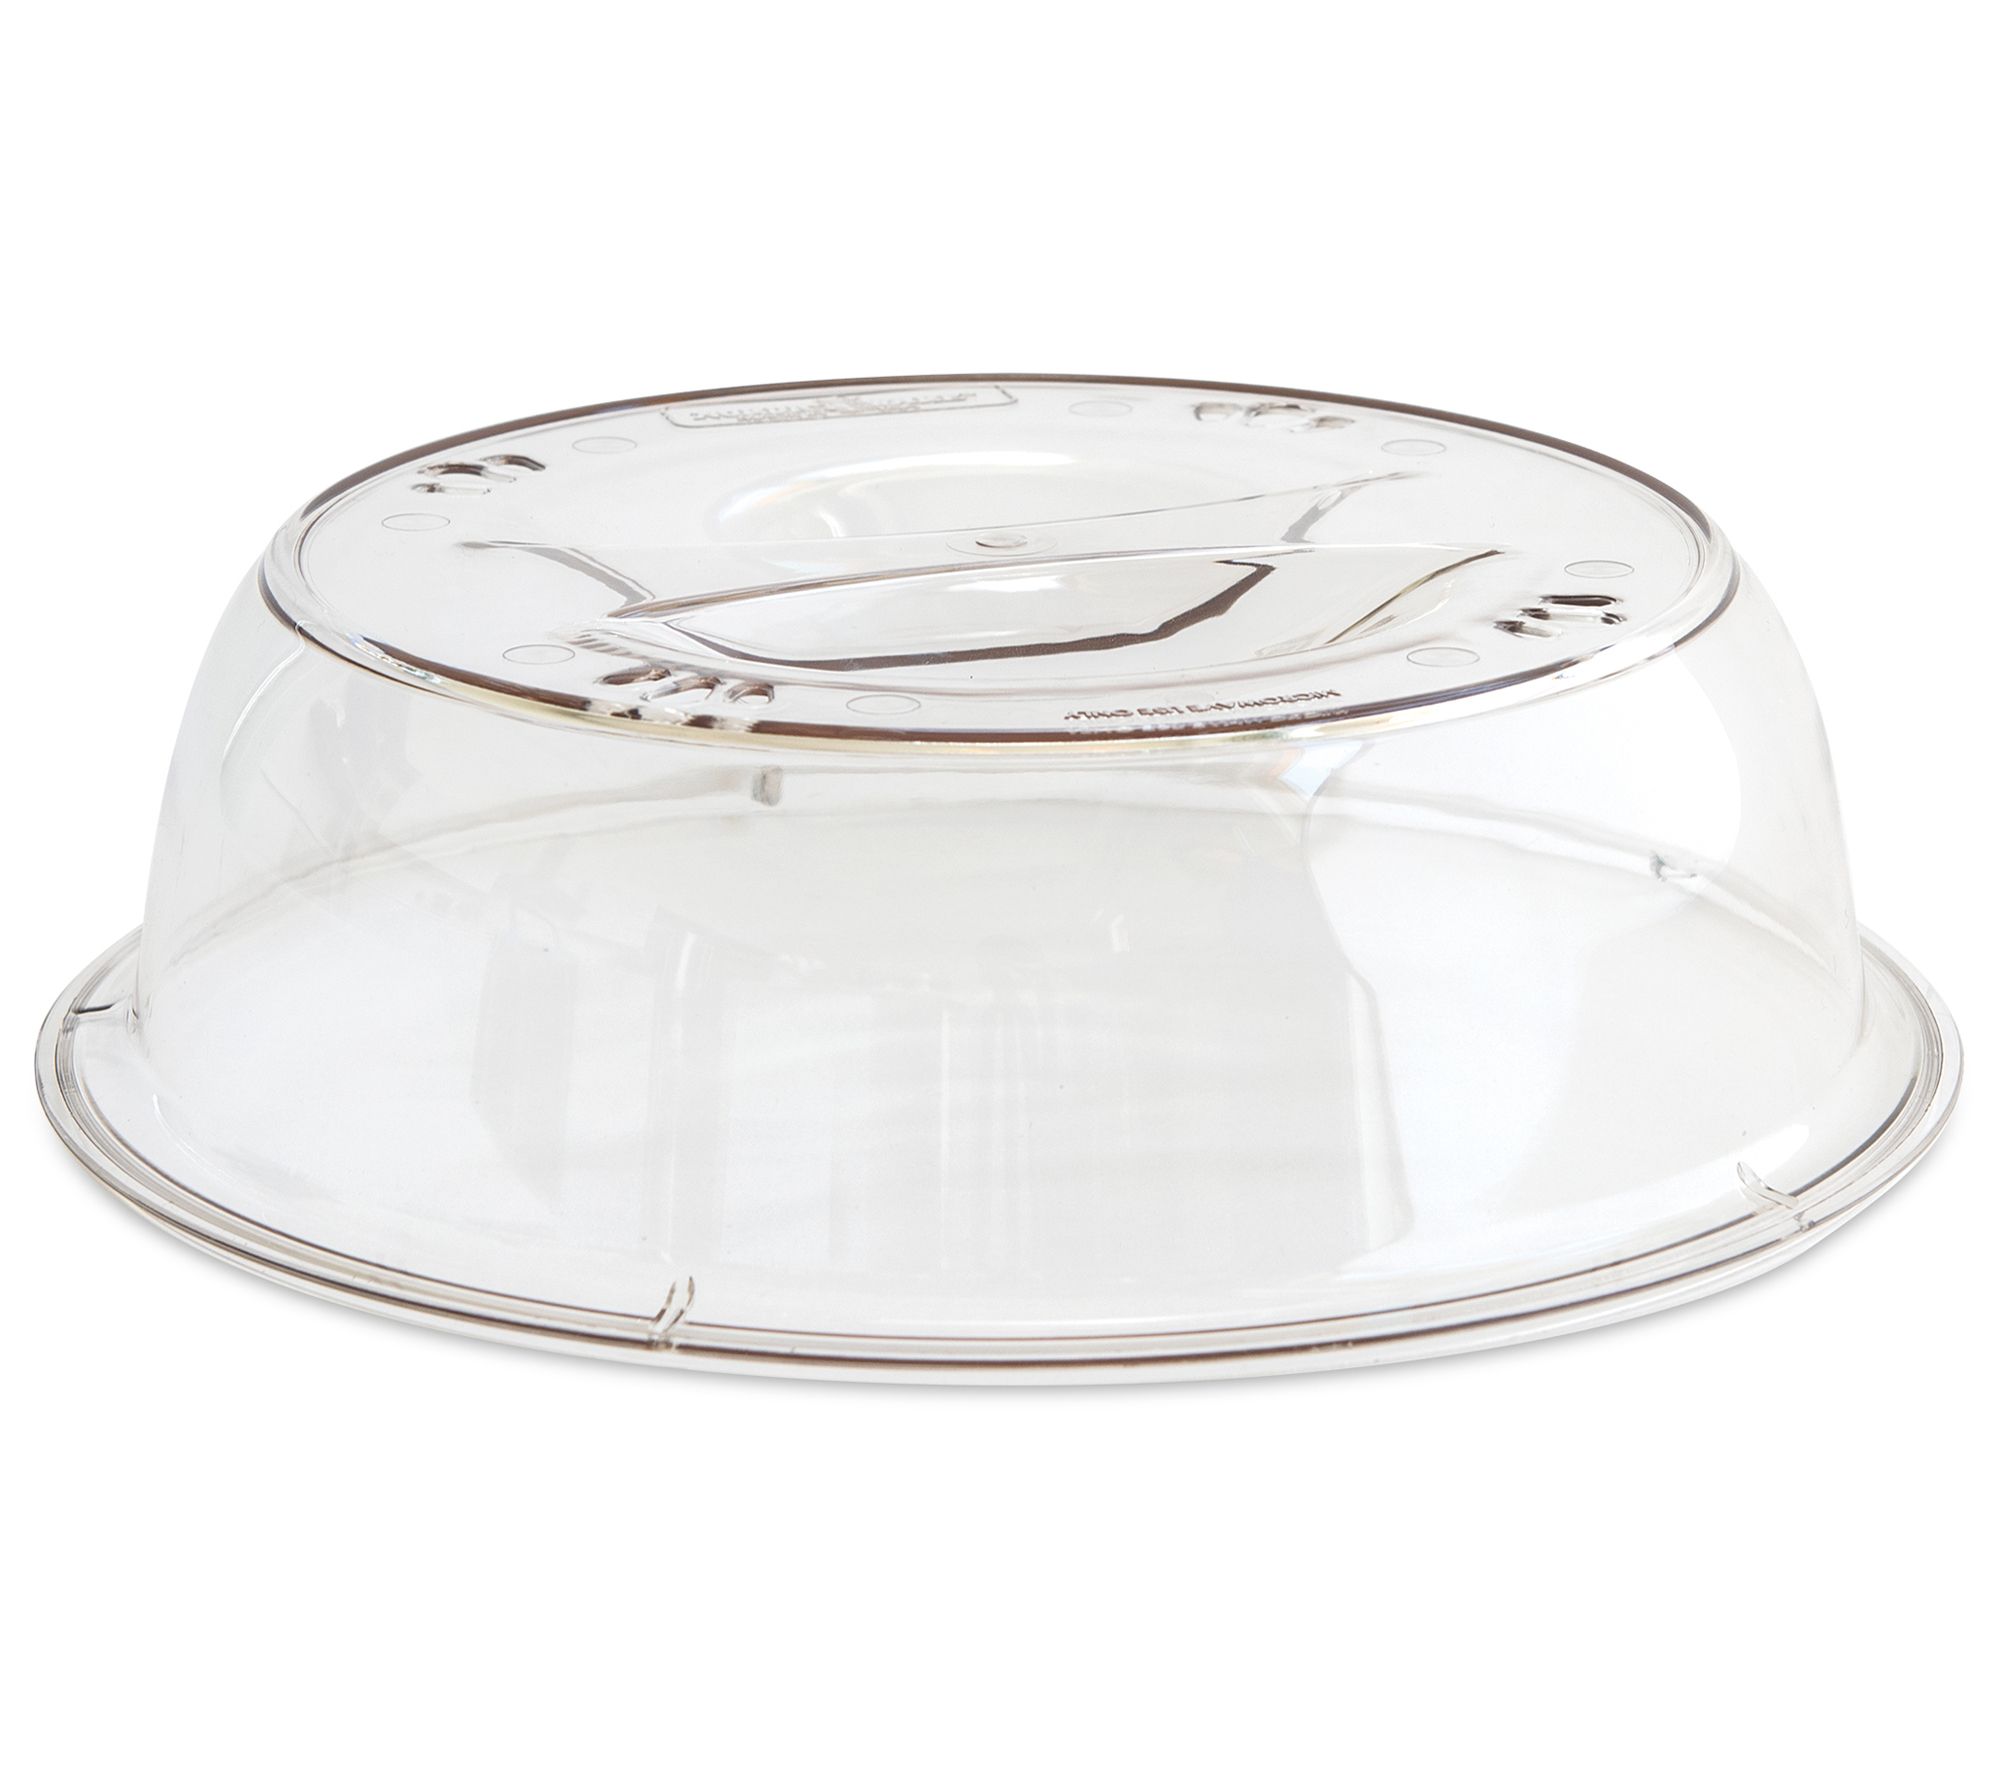 Nordic Ware Deluxe 10-in. Microwave Plate Cover